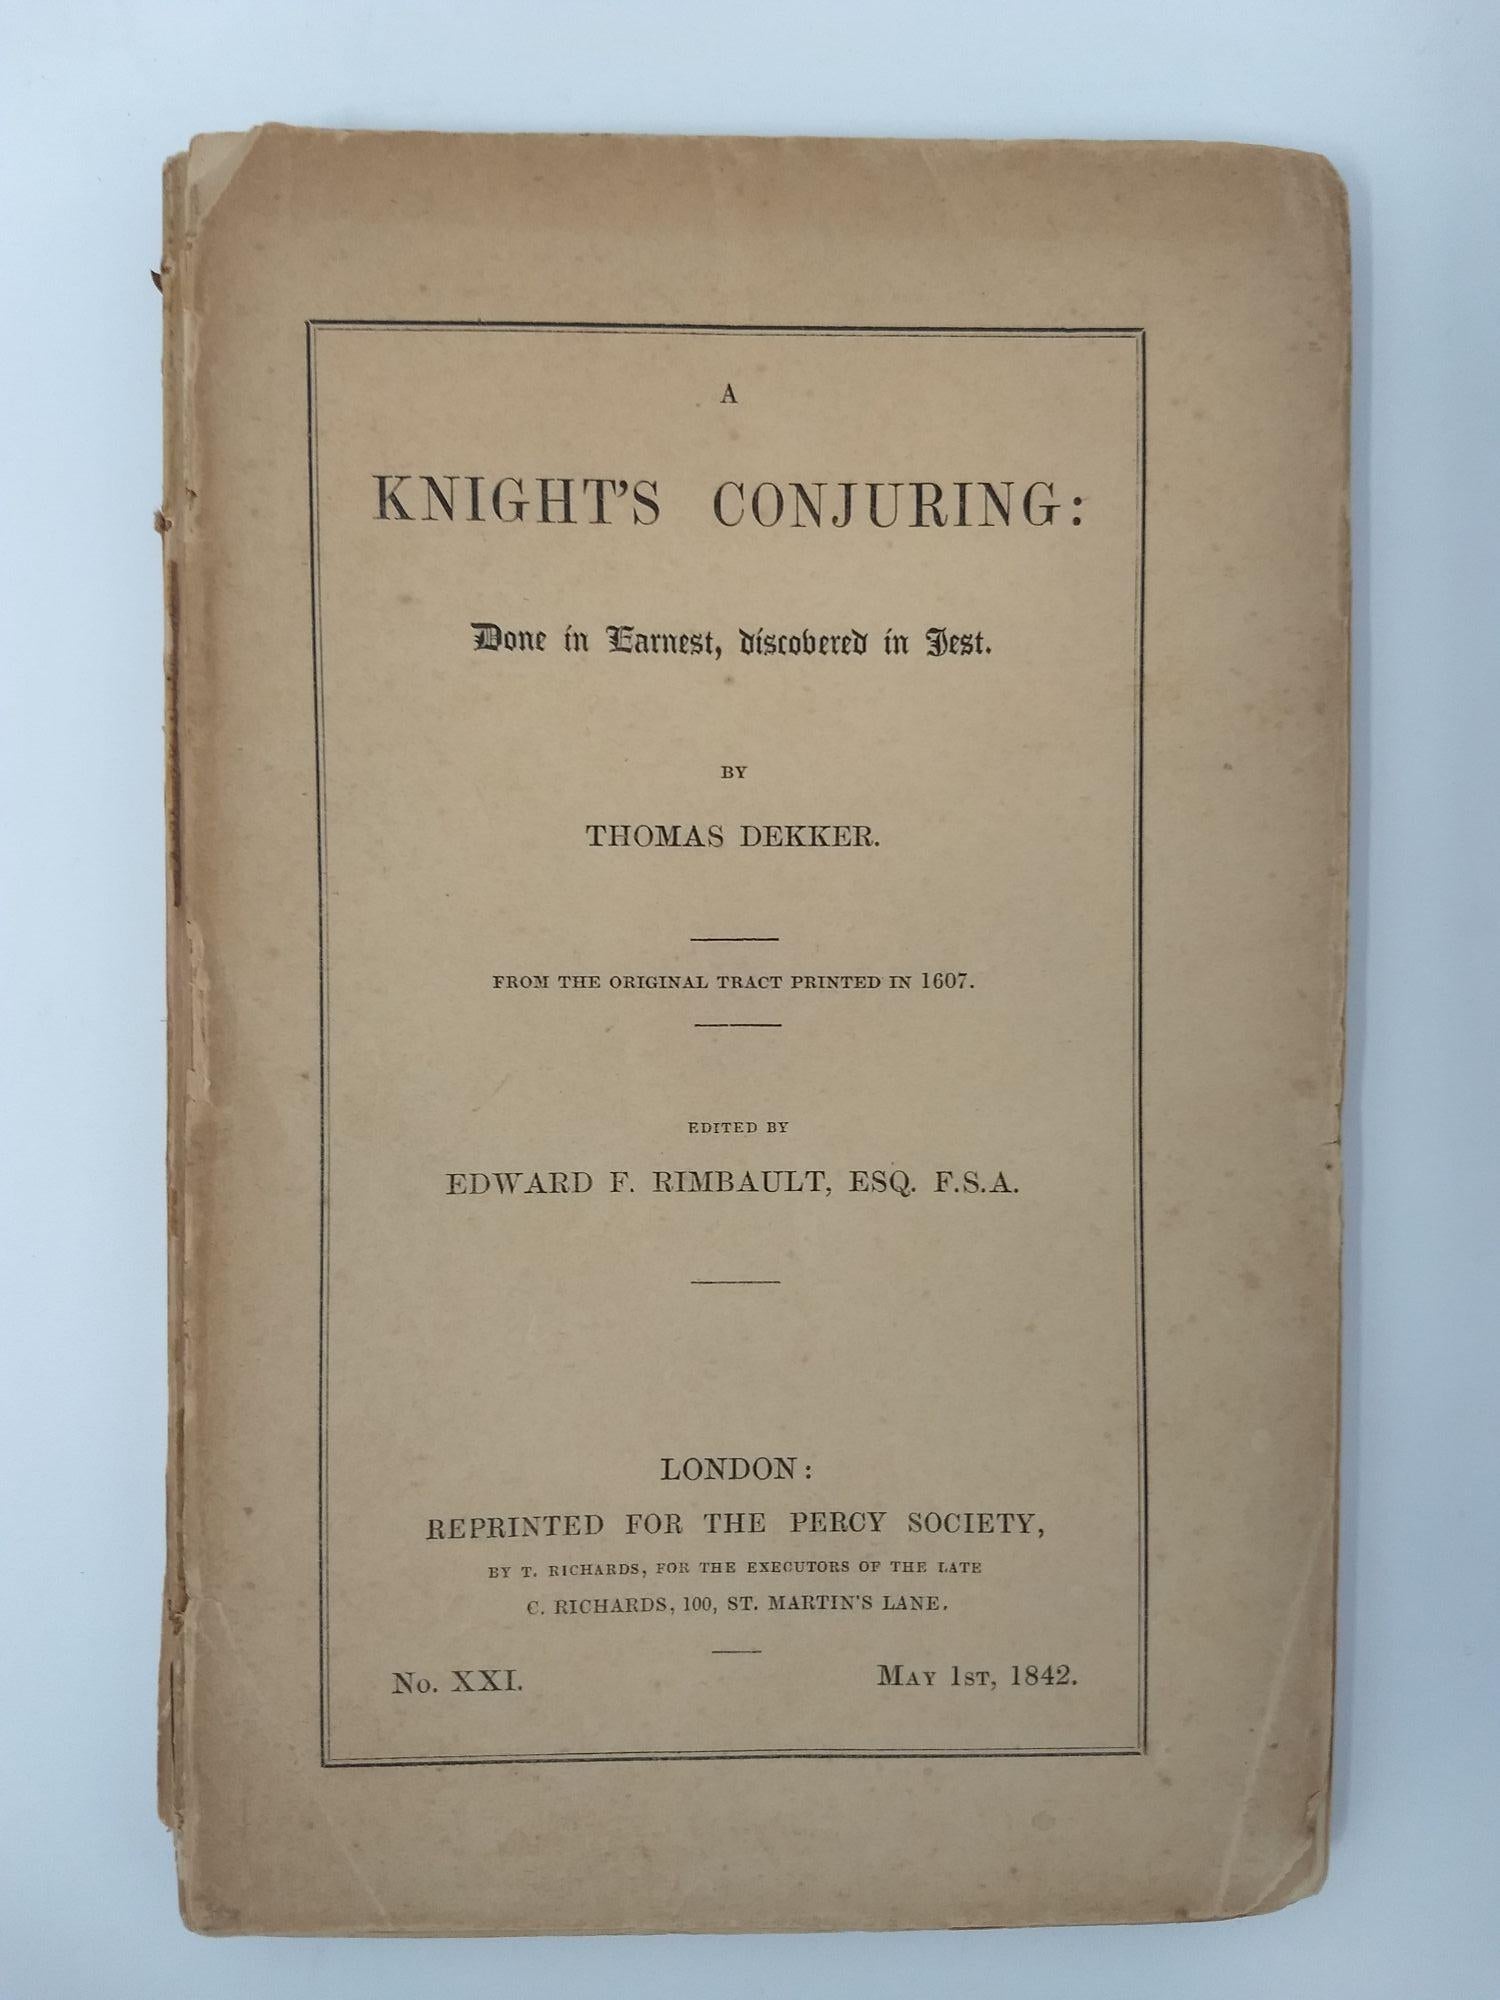 Dekker, Thomas (Edited by Edward Francis Rimbault, Esq.) - A Knight's Conjuring : Done in Earnest, Discovered in Jest (No. Xx1); (from the Original Tract Printed in 1607)